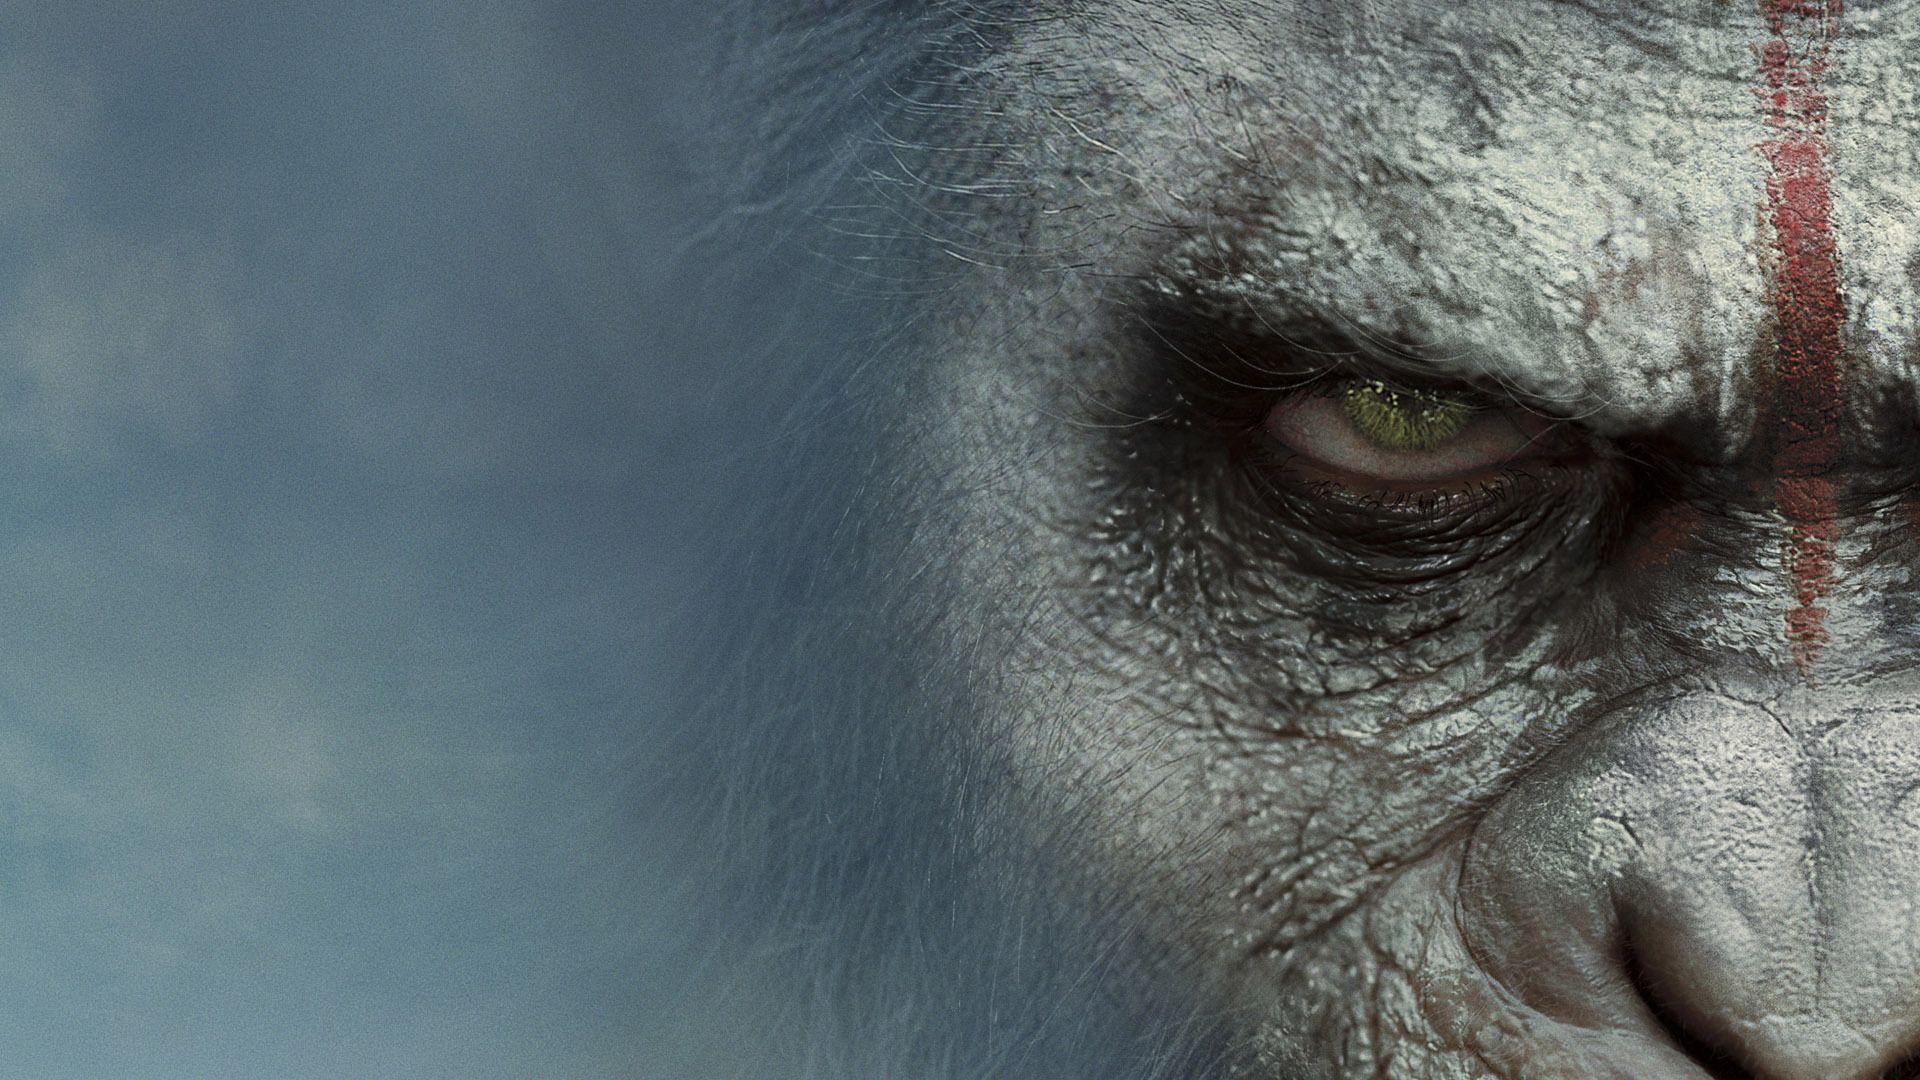 War For The Planet Of The Apes Wallpaper Image Photo Picture